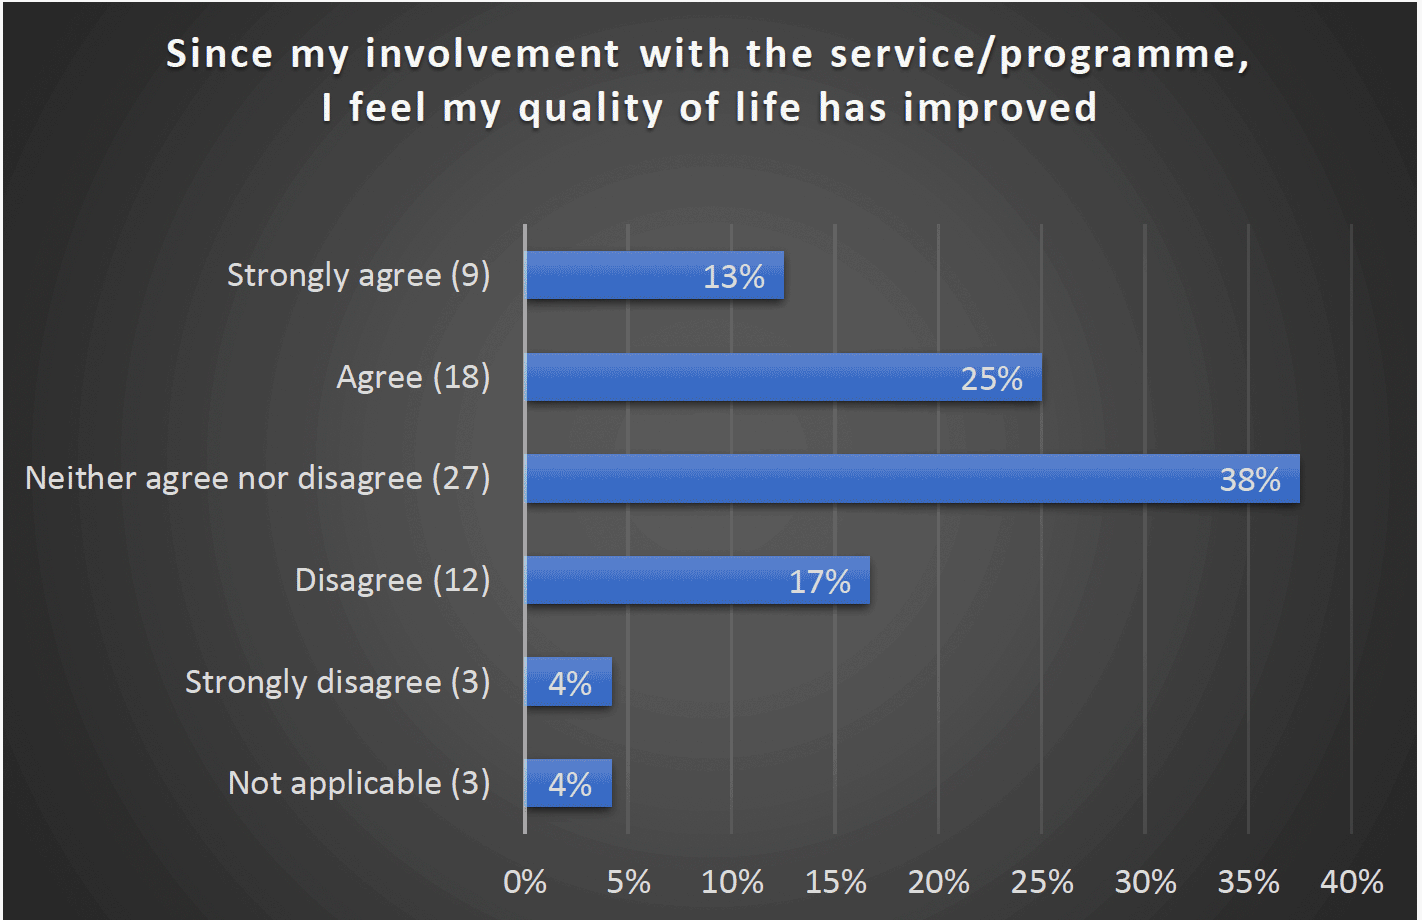 Since my involvement with the service/programme, I feel my quality of life has improved - Strongly agree (9) 13%, Agree (18) 25%, Neither agree nor disagree (27) 38%, Disagree (12) 17%, Strongly disagree (3) 4%, Not applicable (3) 4%